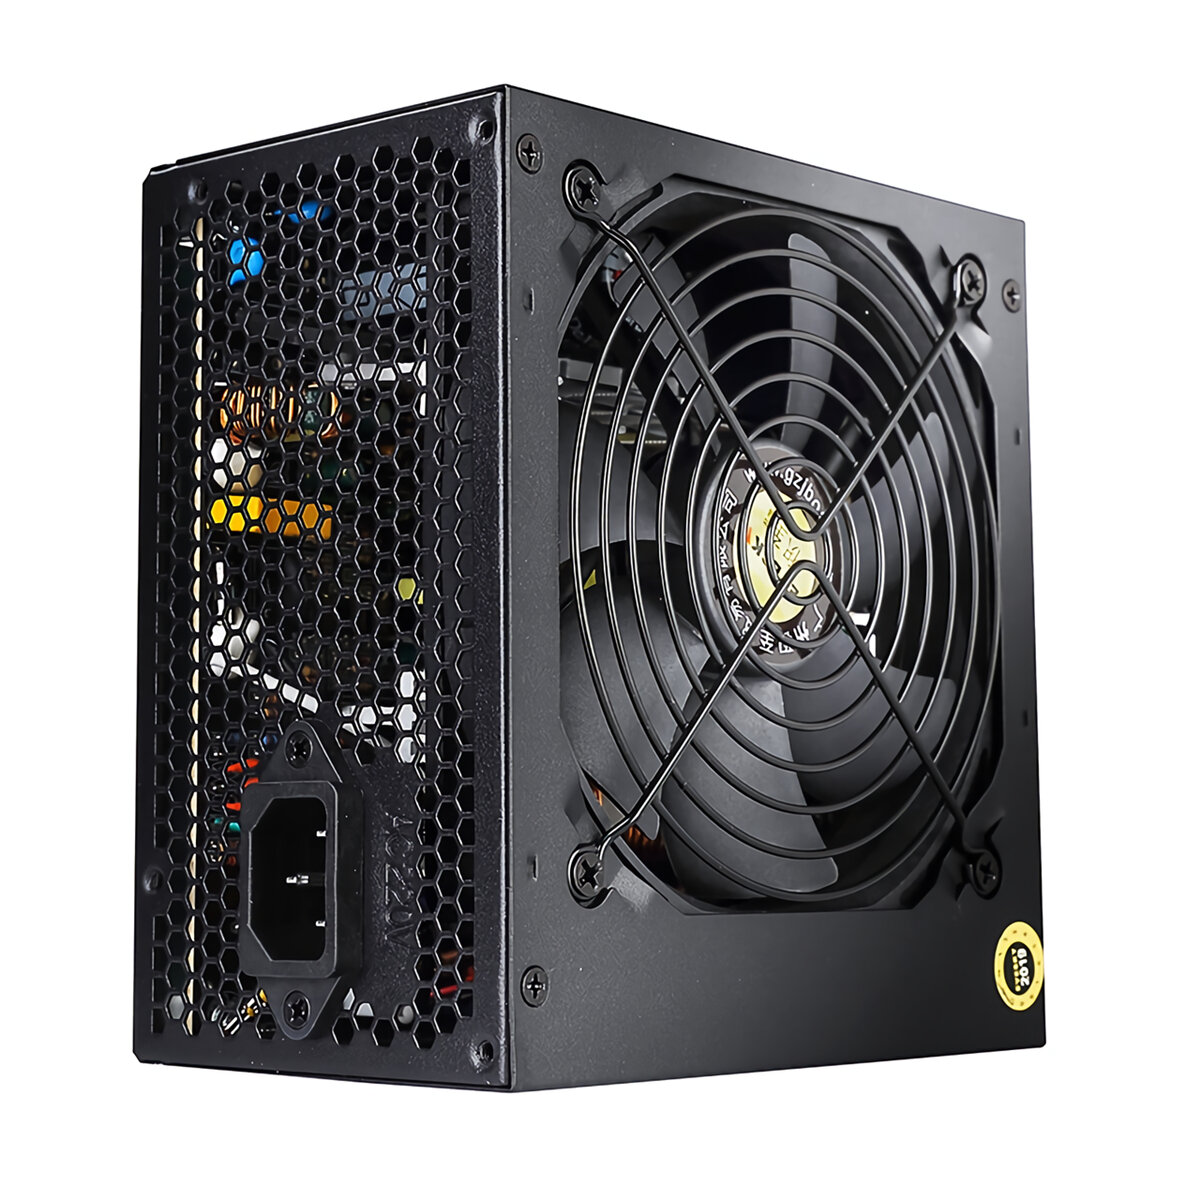 

EVESKY 600W Gaming Power Supply Rated 600W 12CM Fan Silent Intelligent Temperature Control Desktop Computer Host Power S